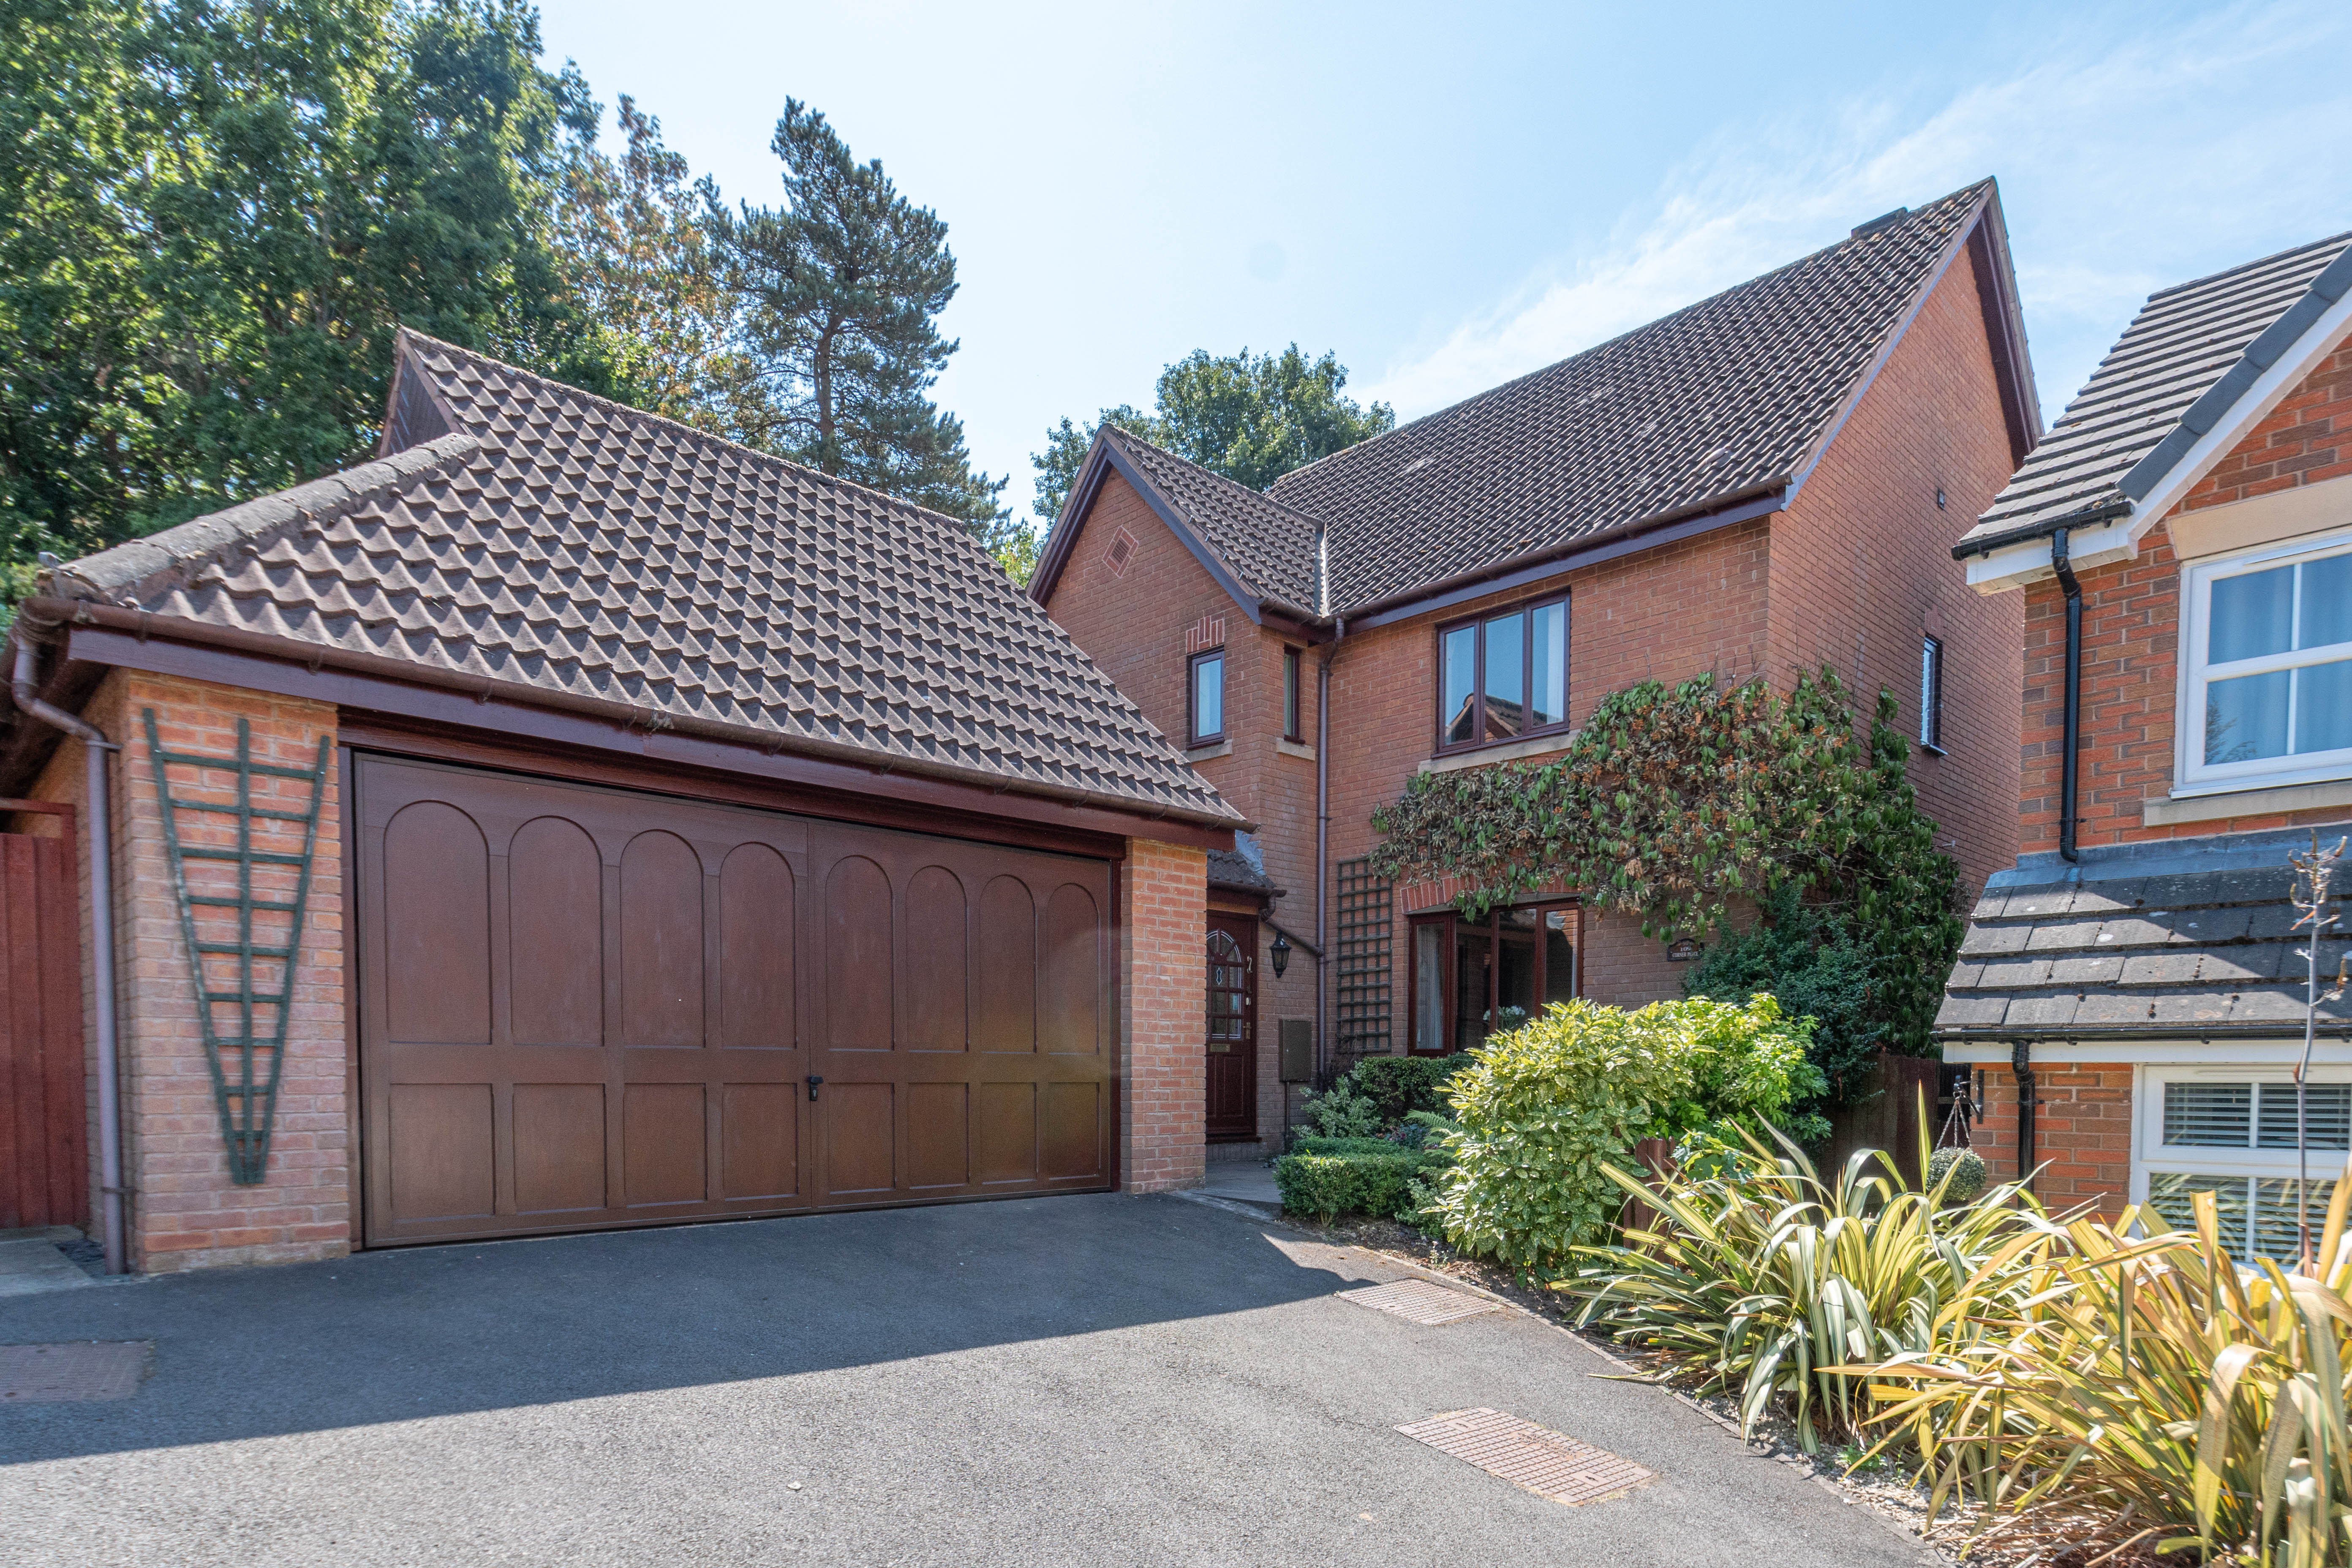 4 bed house for sale in Foxholes Lane, Callow Hill  - Property Image 2